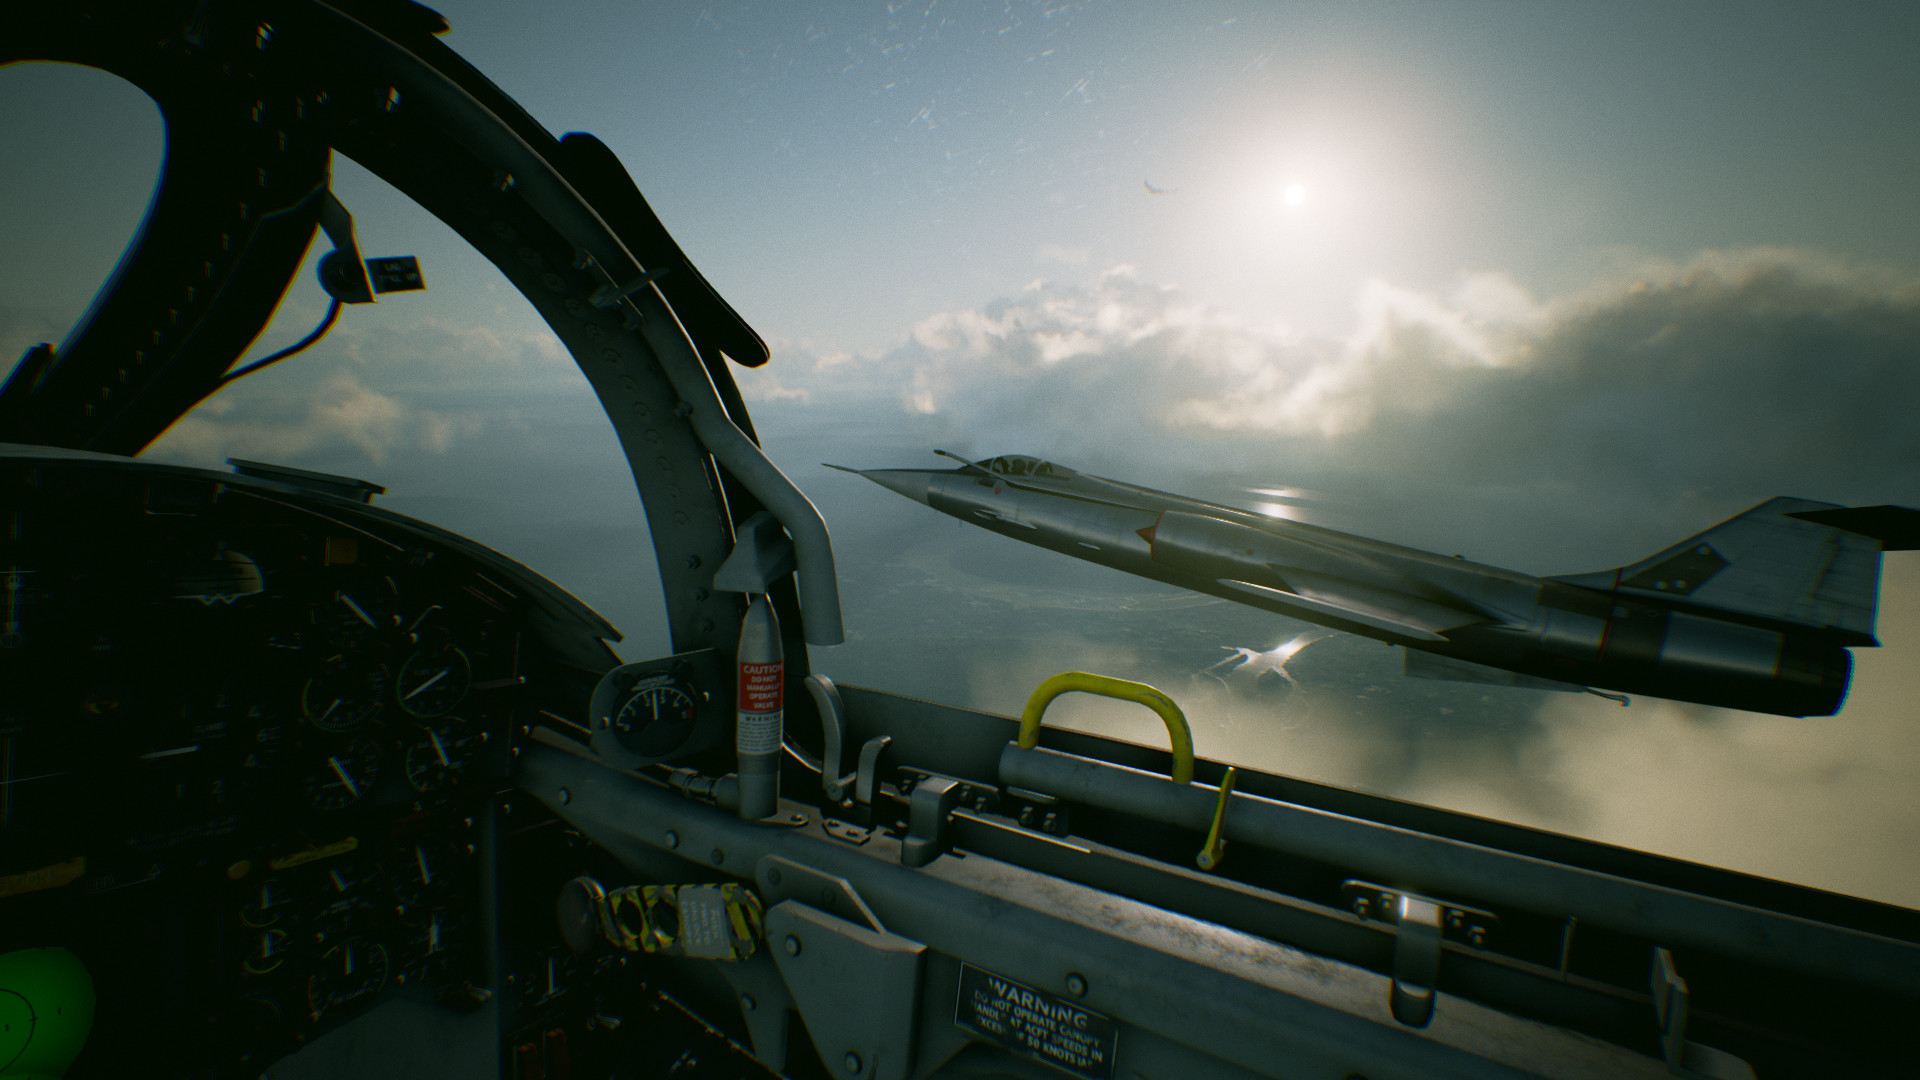 Ace Combat 7 Customisation Trailer Shows How to Make Your Plane Look Fly